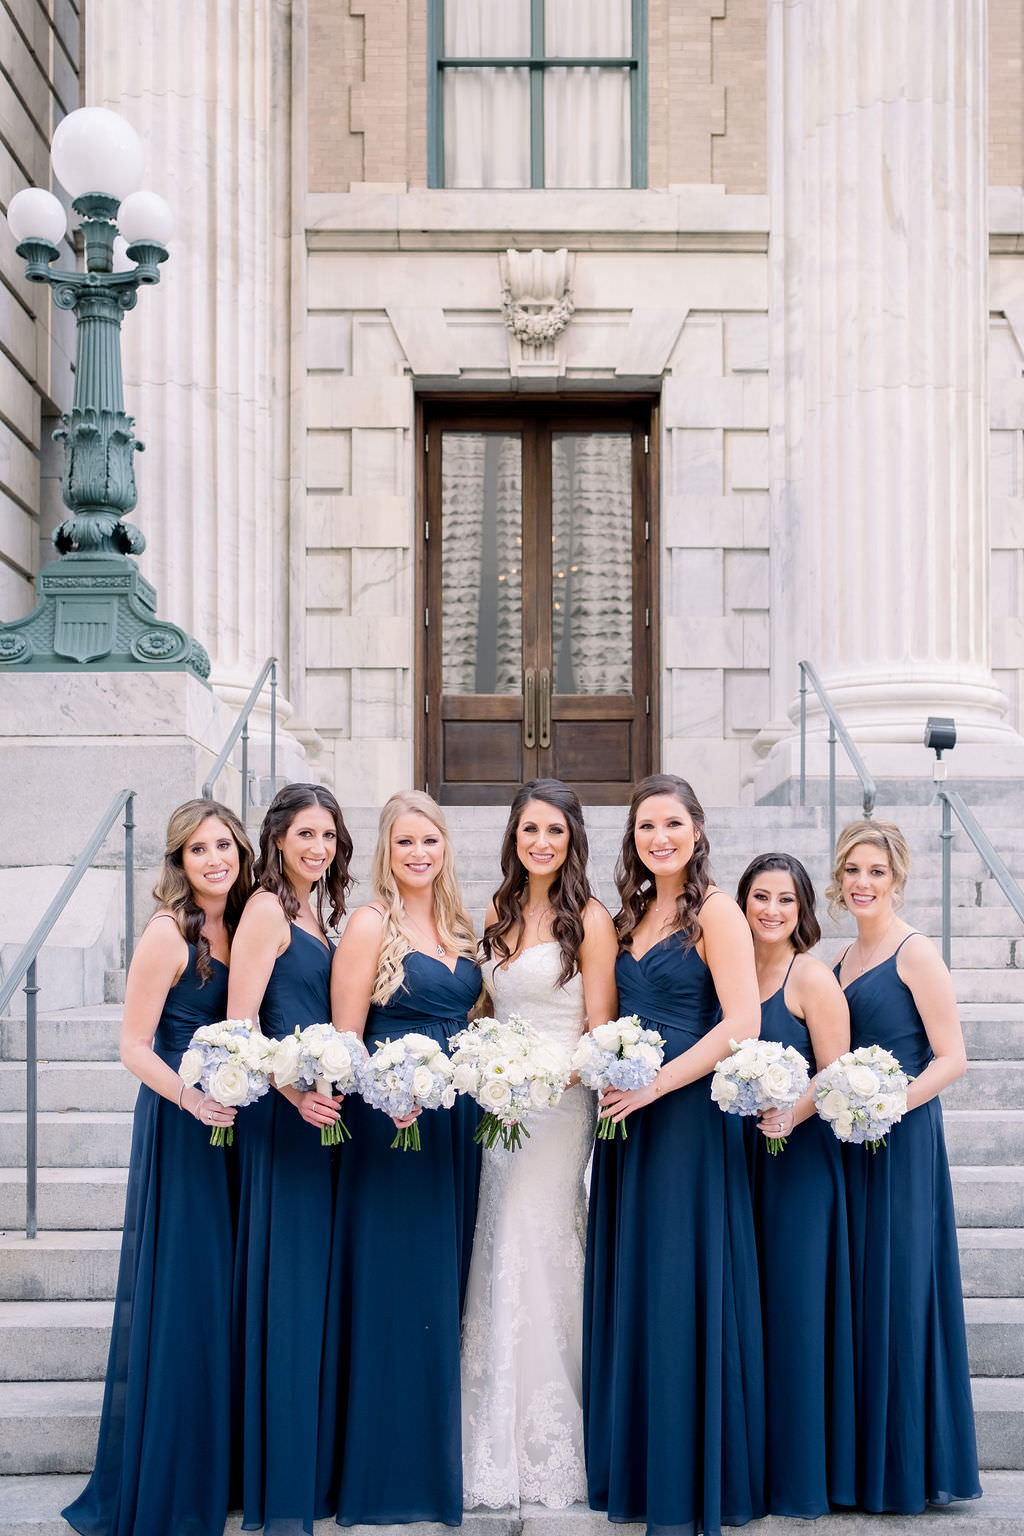 Florida Bride and Bridesmaids Bridal Party Wedding Portrait at Downtown Tampa Hotel Venue Le Meridien, Bridesmaids in Matching Navy Blue Dresses with White, Ivory and Pale Blue Floral Bouquets | Tampa Bay Wedding Planner Breezin Entertainment